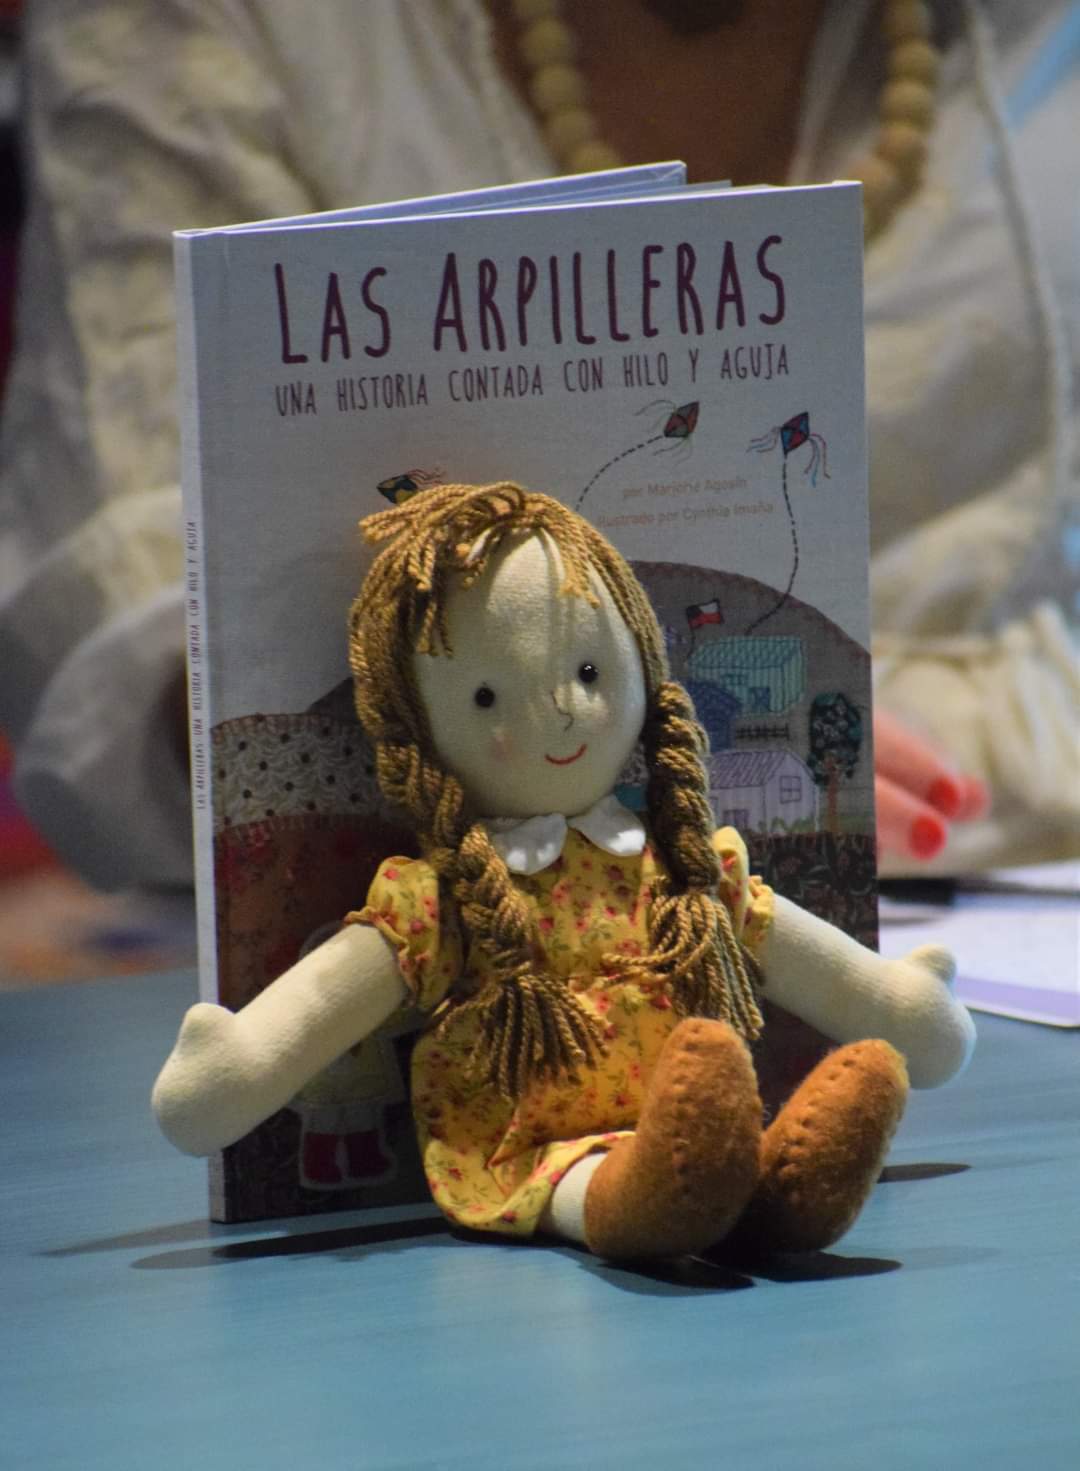 Doll made by Cynthia Imaña rests against the book 